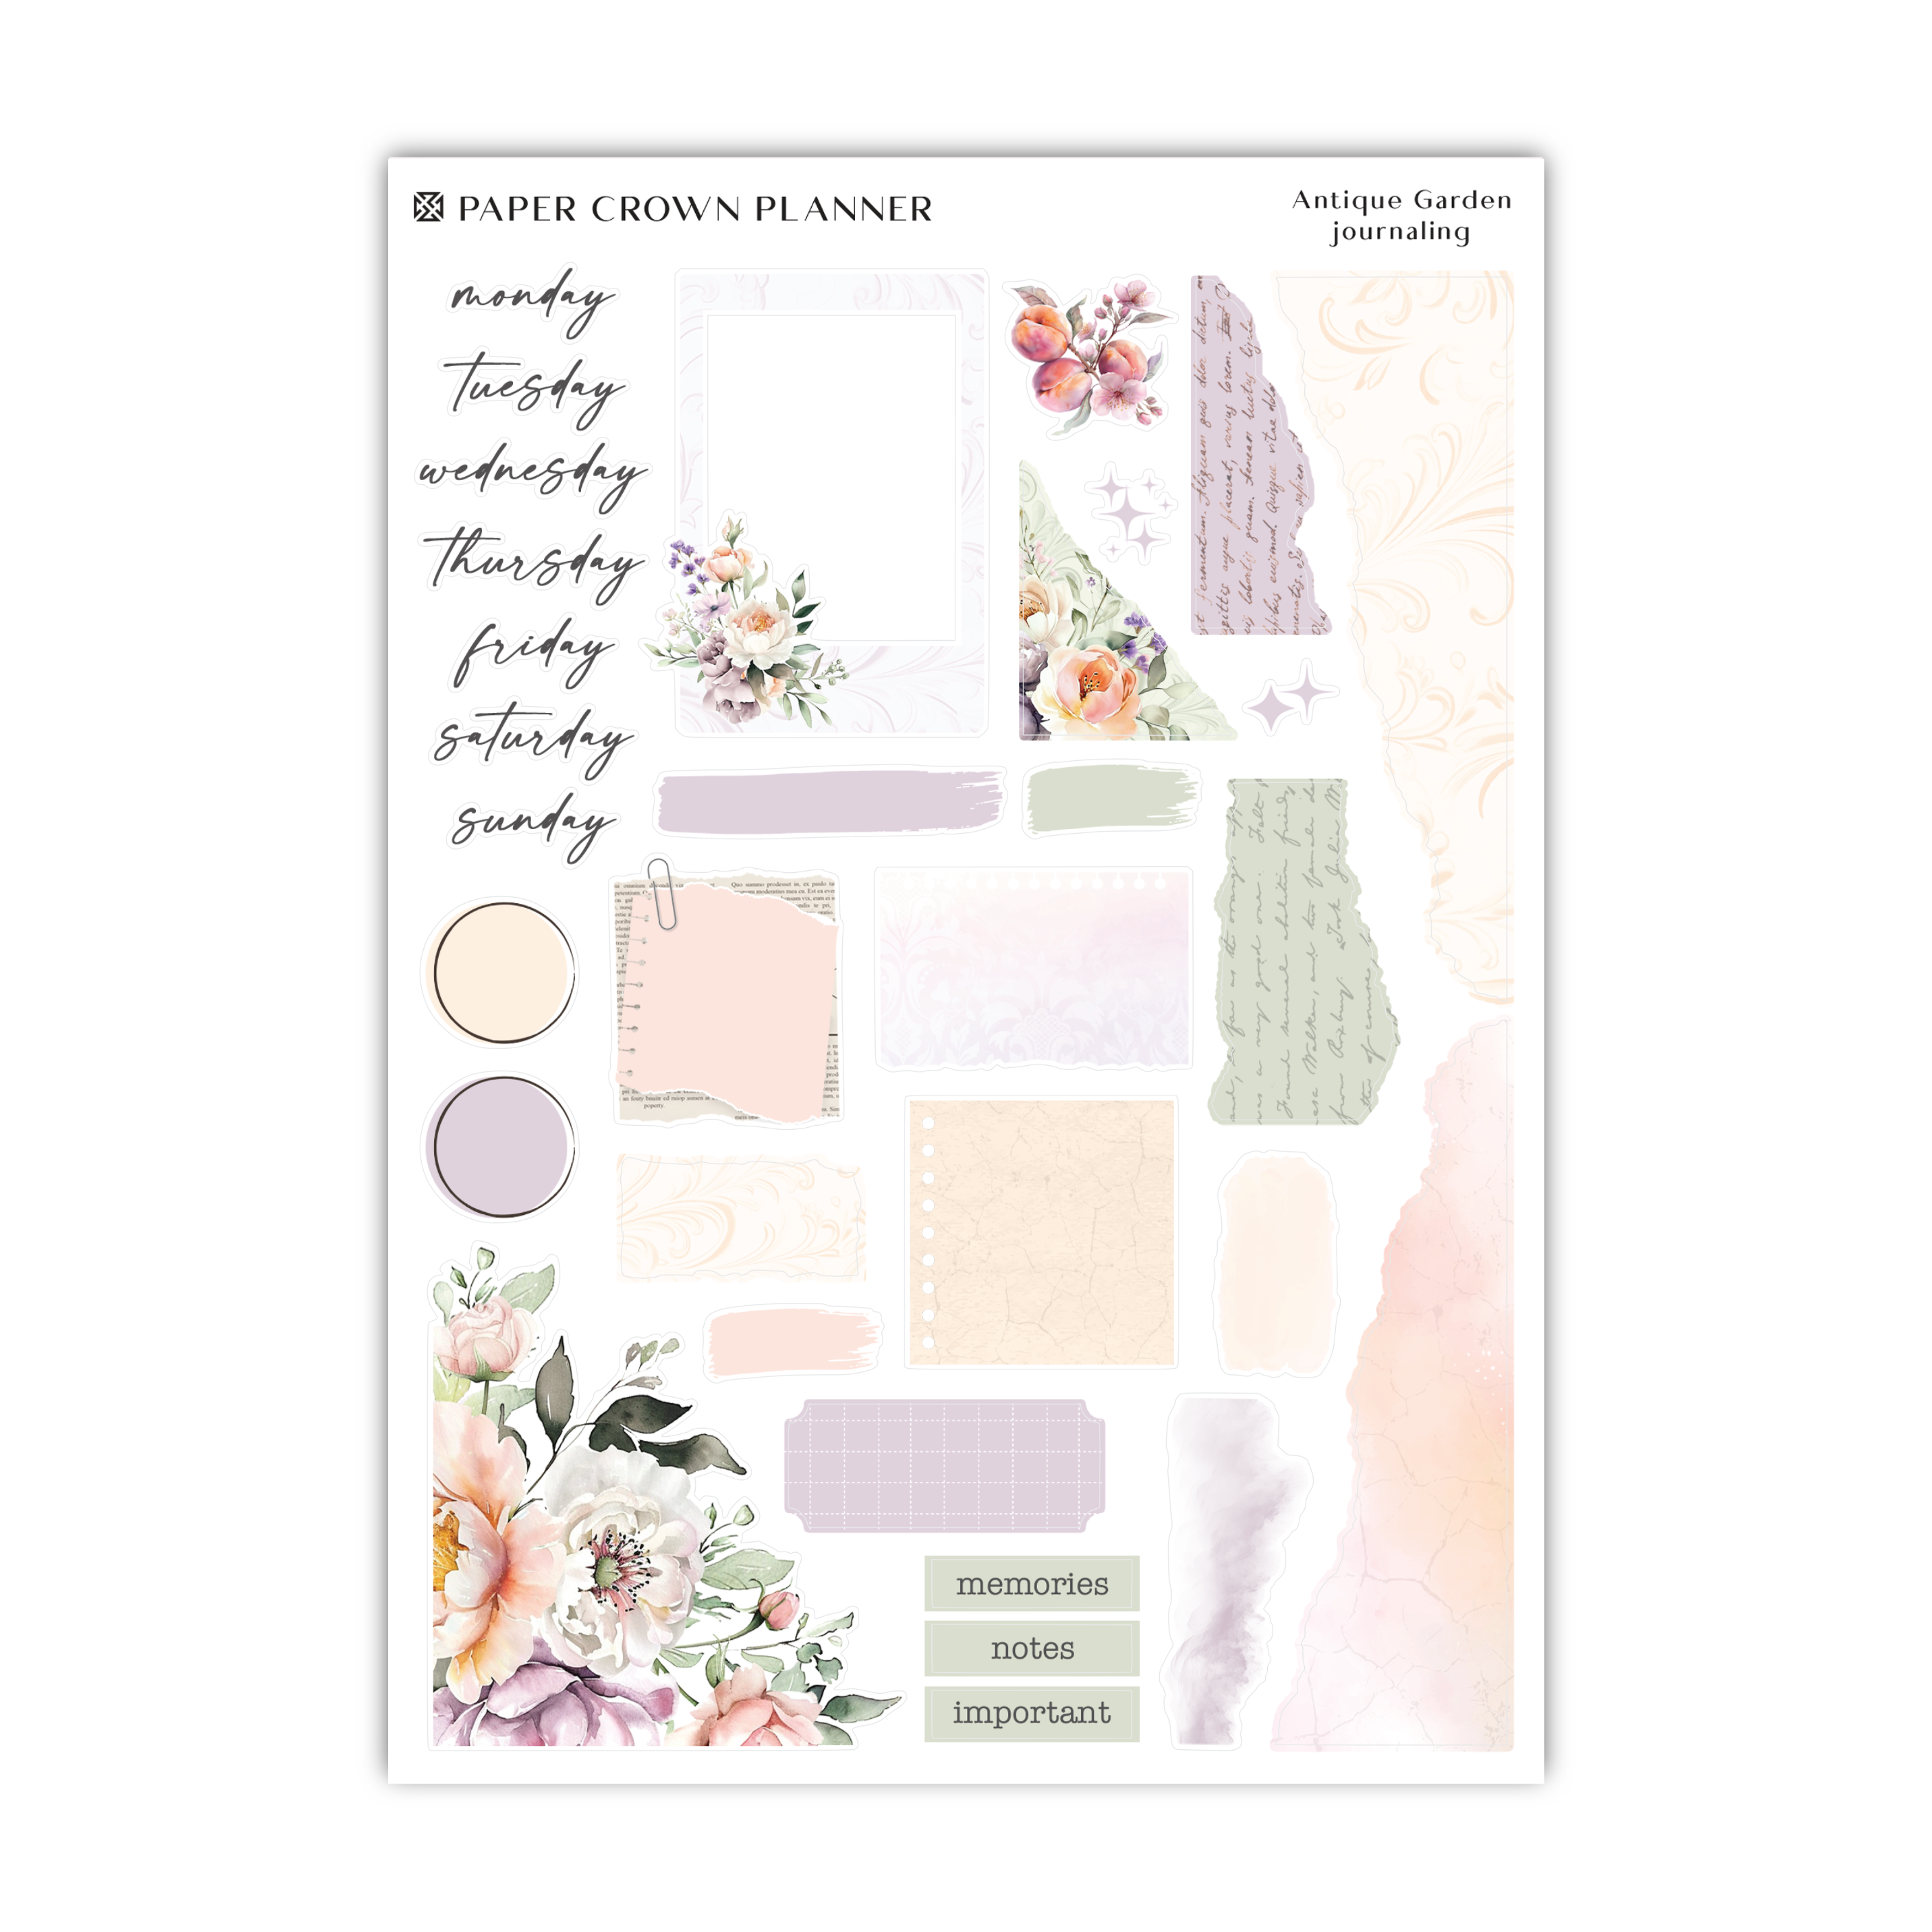 a paper crown planner with flowers and pastes